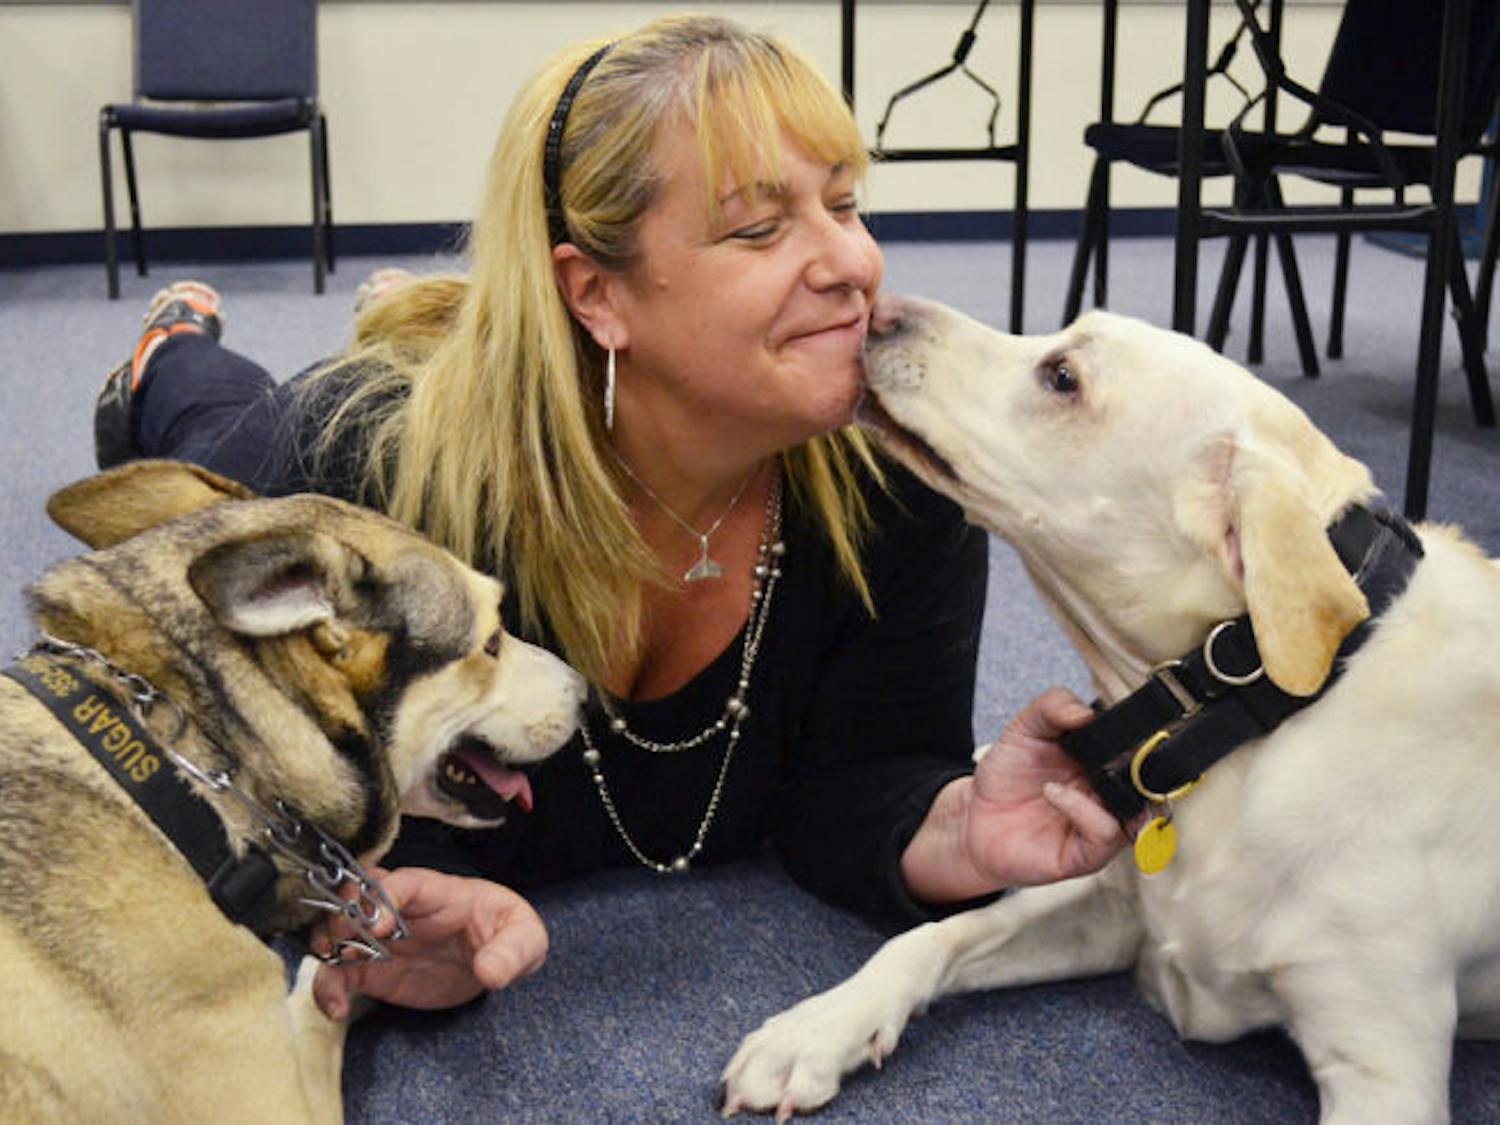 Marcia Wolf-Deffense, 45, plays with her dogs Sugar, 7, and Spice, 6, in the UPD conference room Friday. The Humane Society has received about $500 in donations in memory of UPD Officer Jean-Guy Deffense.